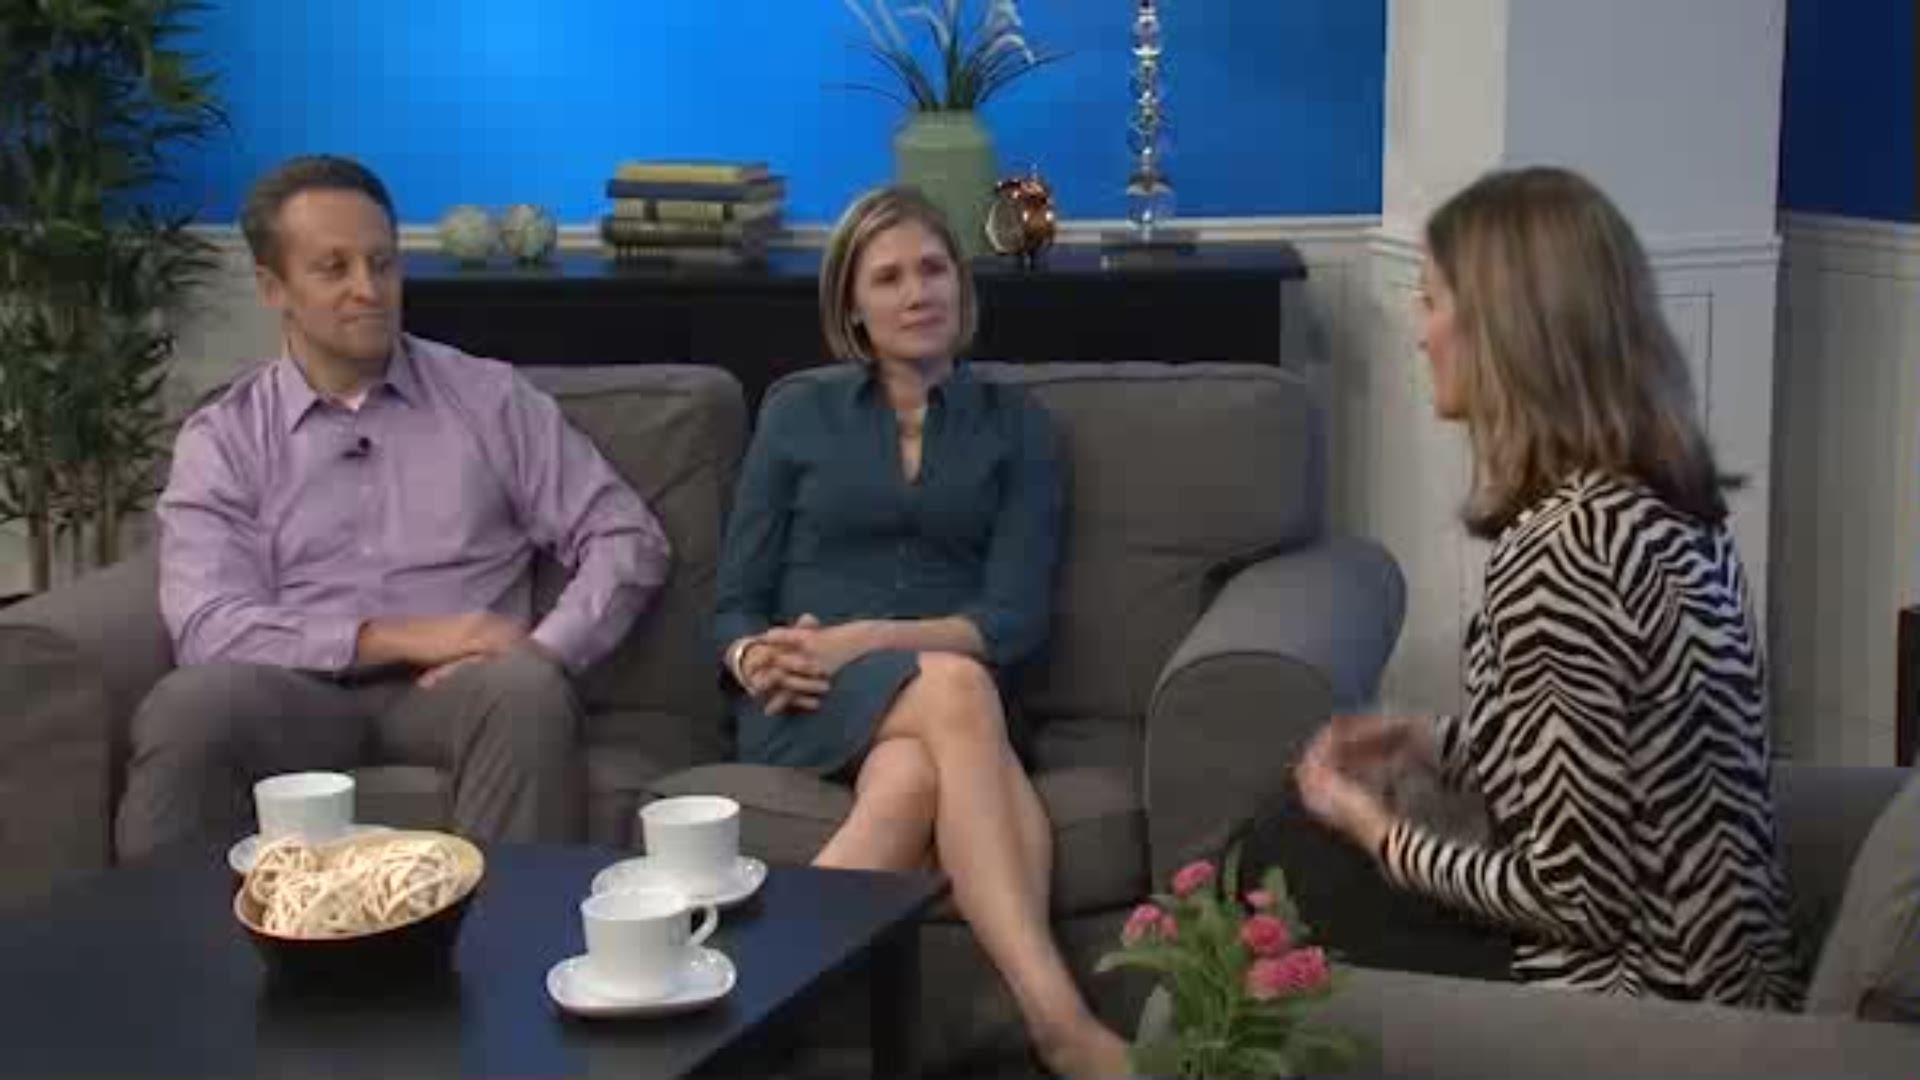 Greater Portland Today segment. Dr. Gorin explains tummy tuck procedure that removed excess skin from abdomen.